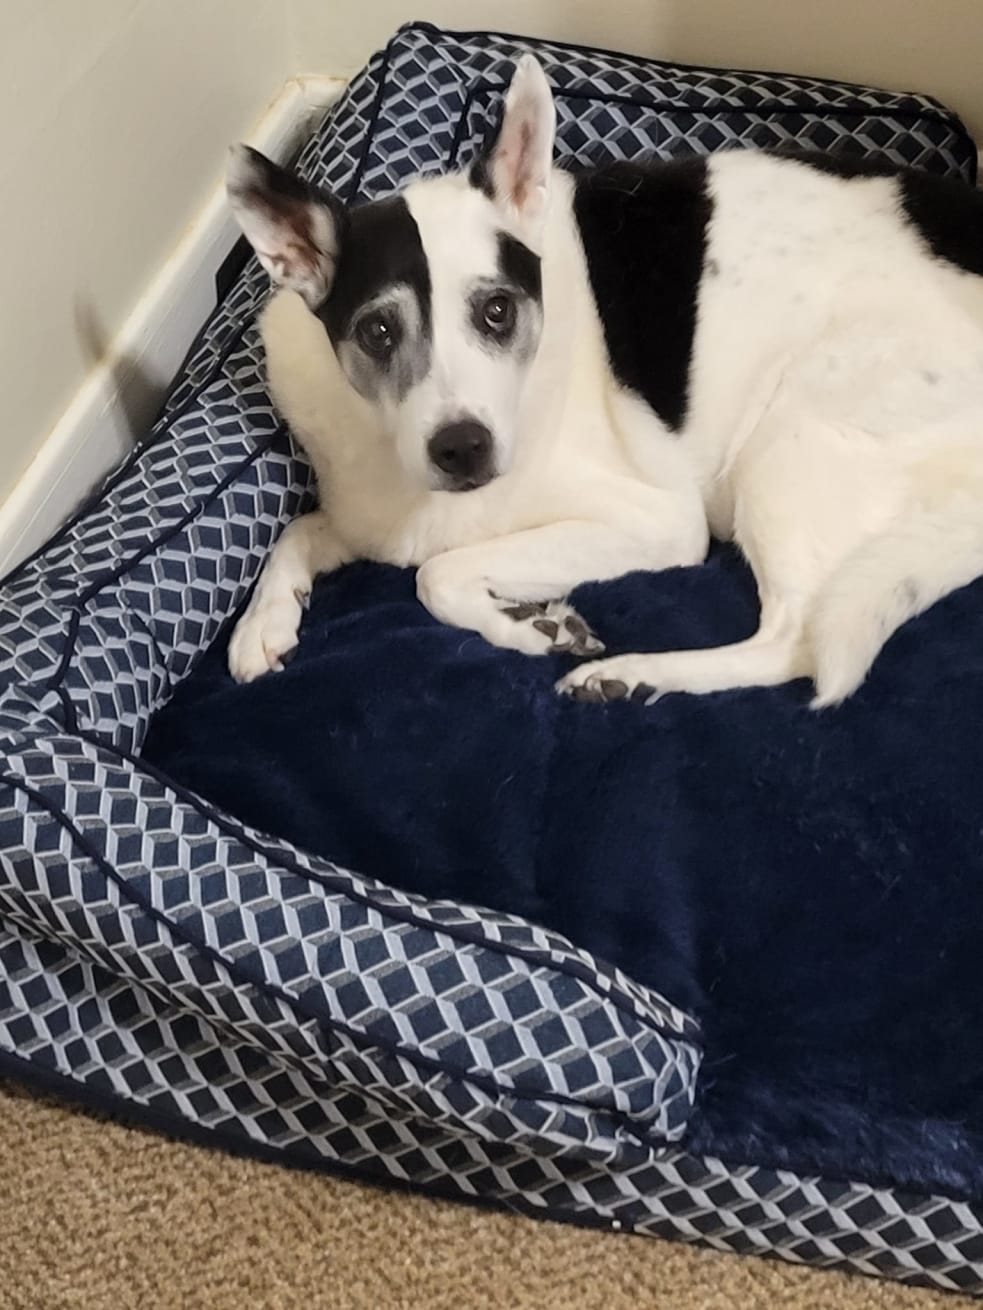 A small black and white dog lays in a dog bed